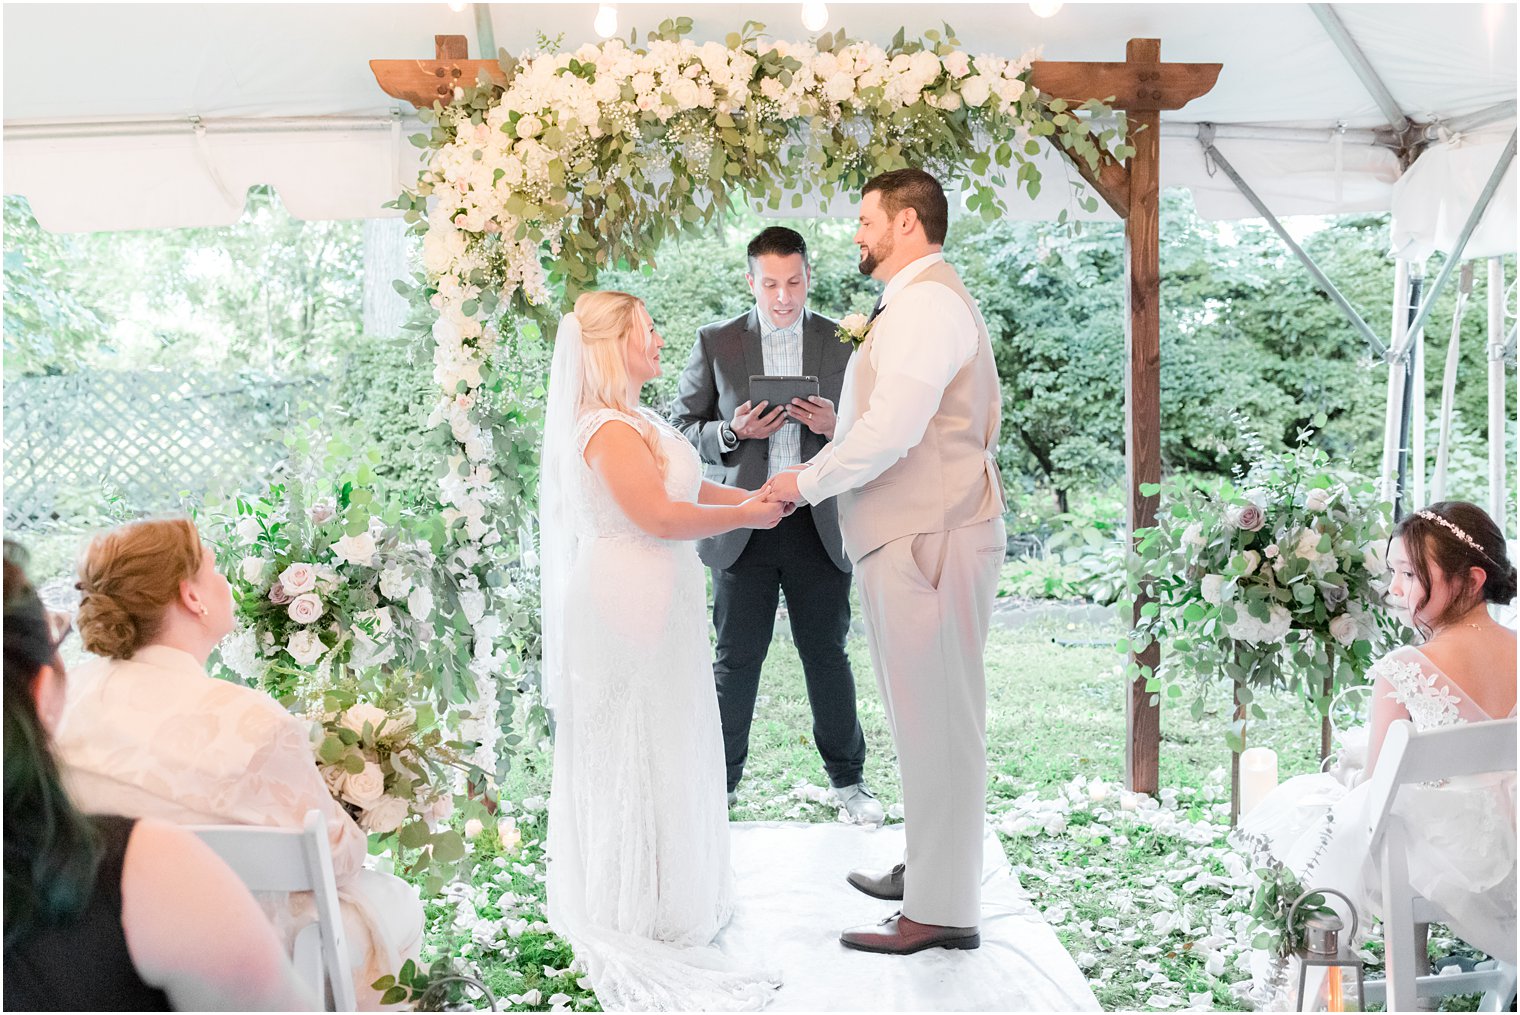 newlyweds exchange vows under wooden arbor with white flowers